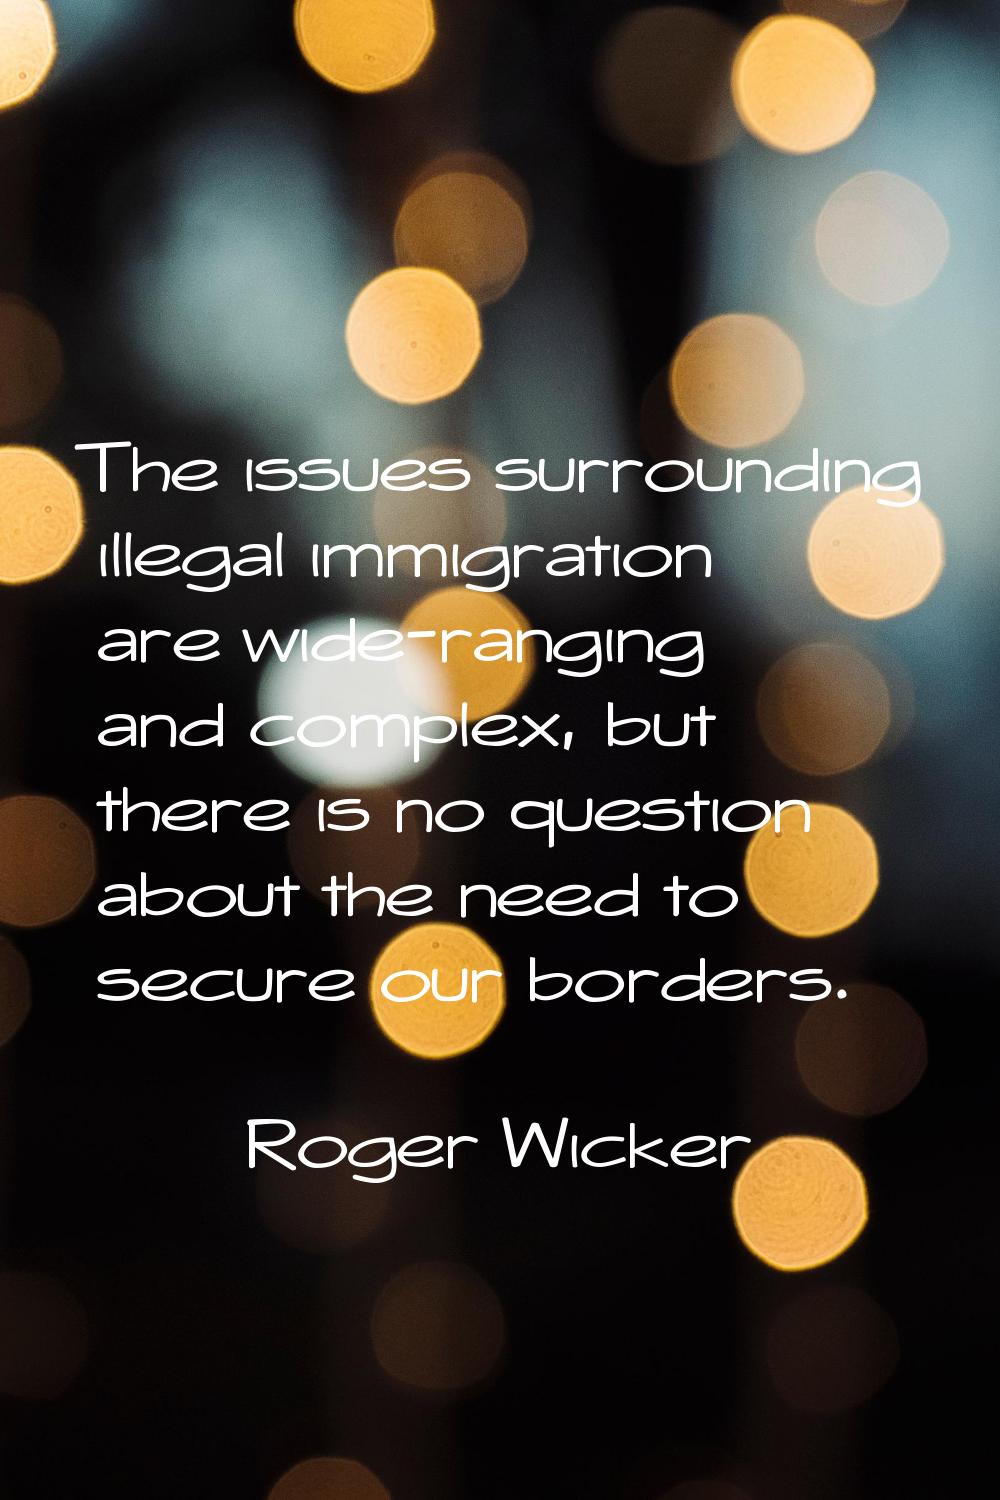 The issues surrounding illegal immigration are wide-ranging and complex, but there is no question a